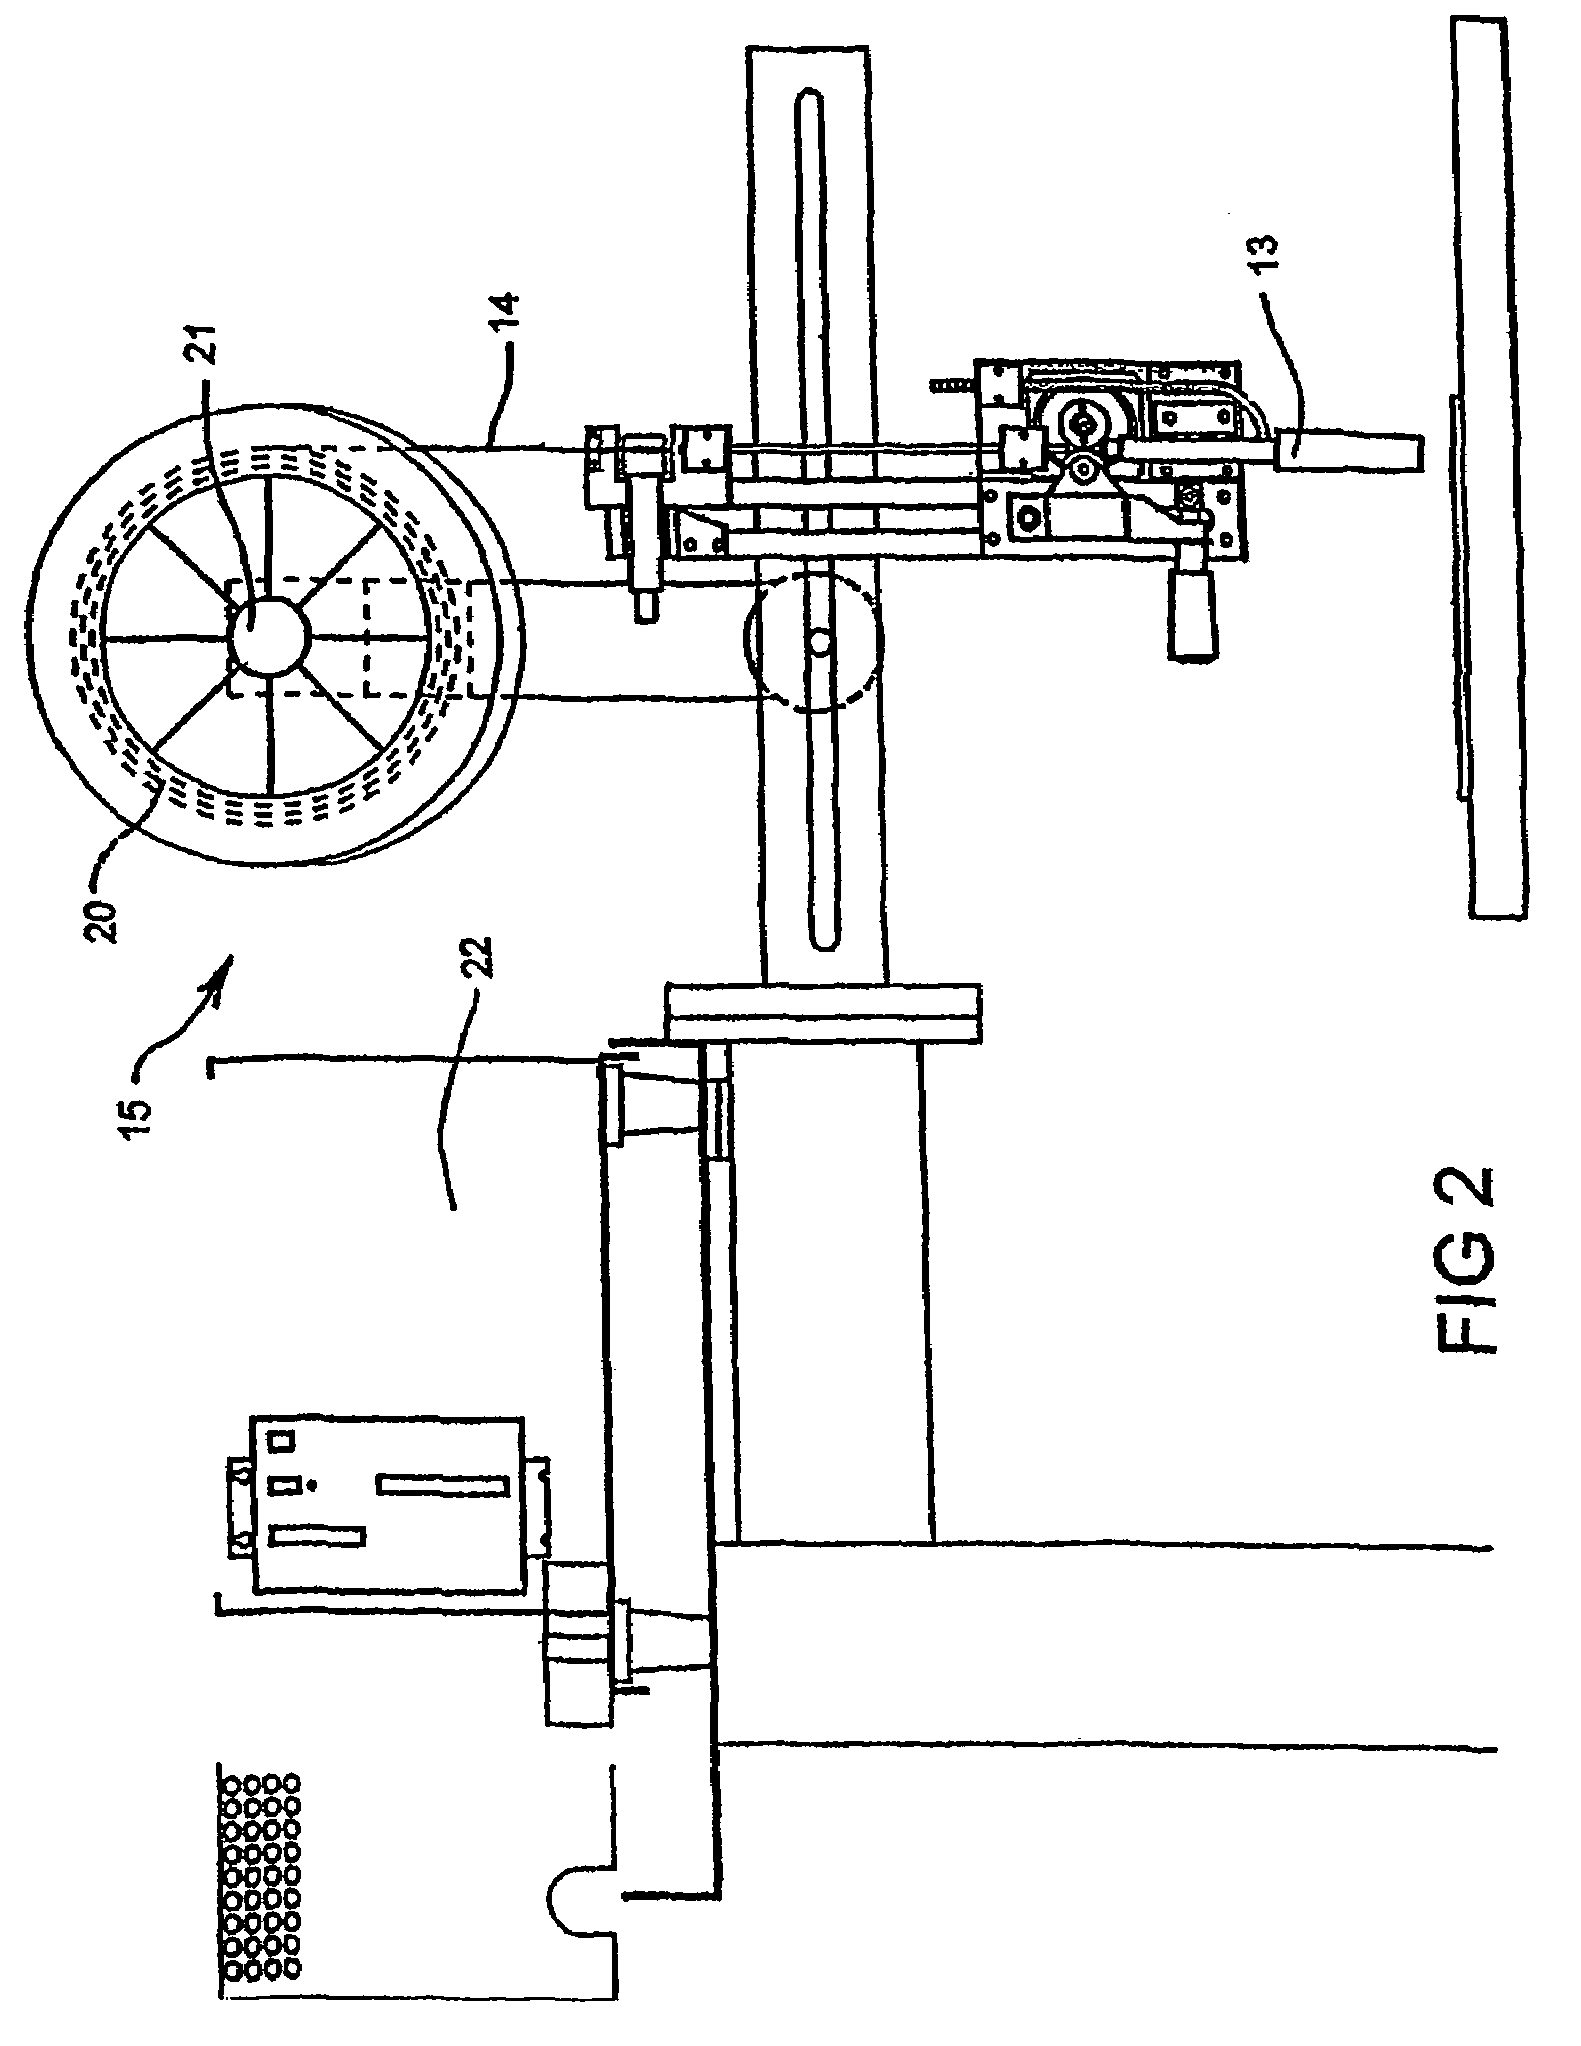 Control method and system for metal arc welding